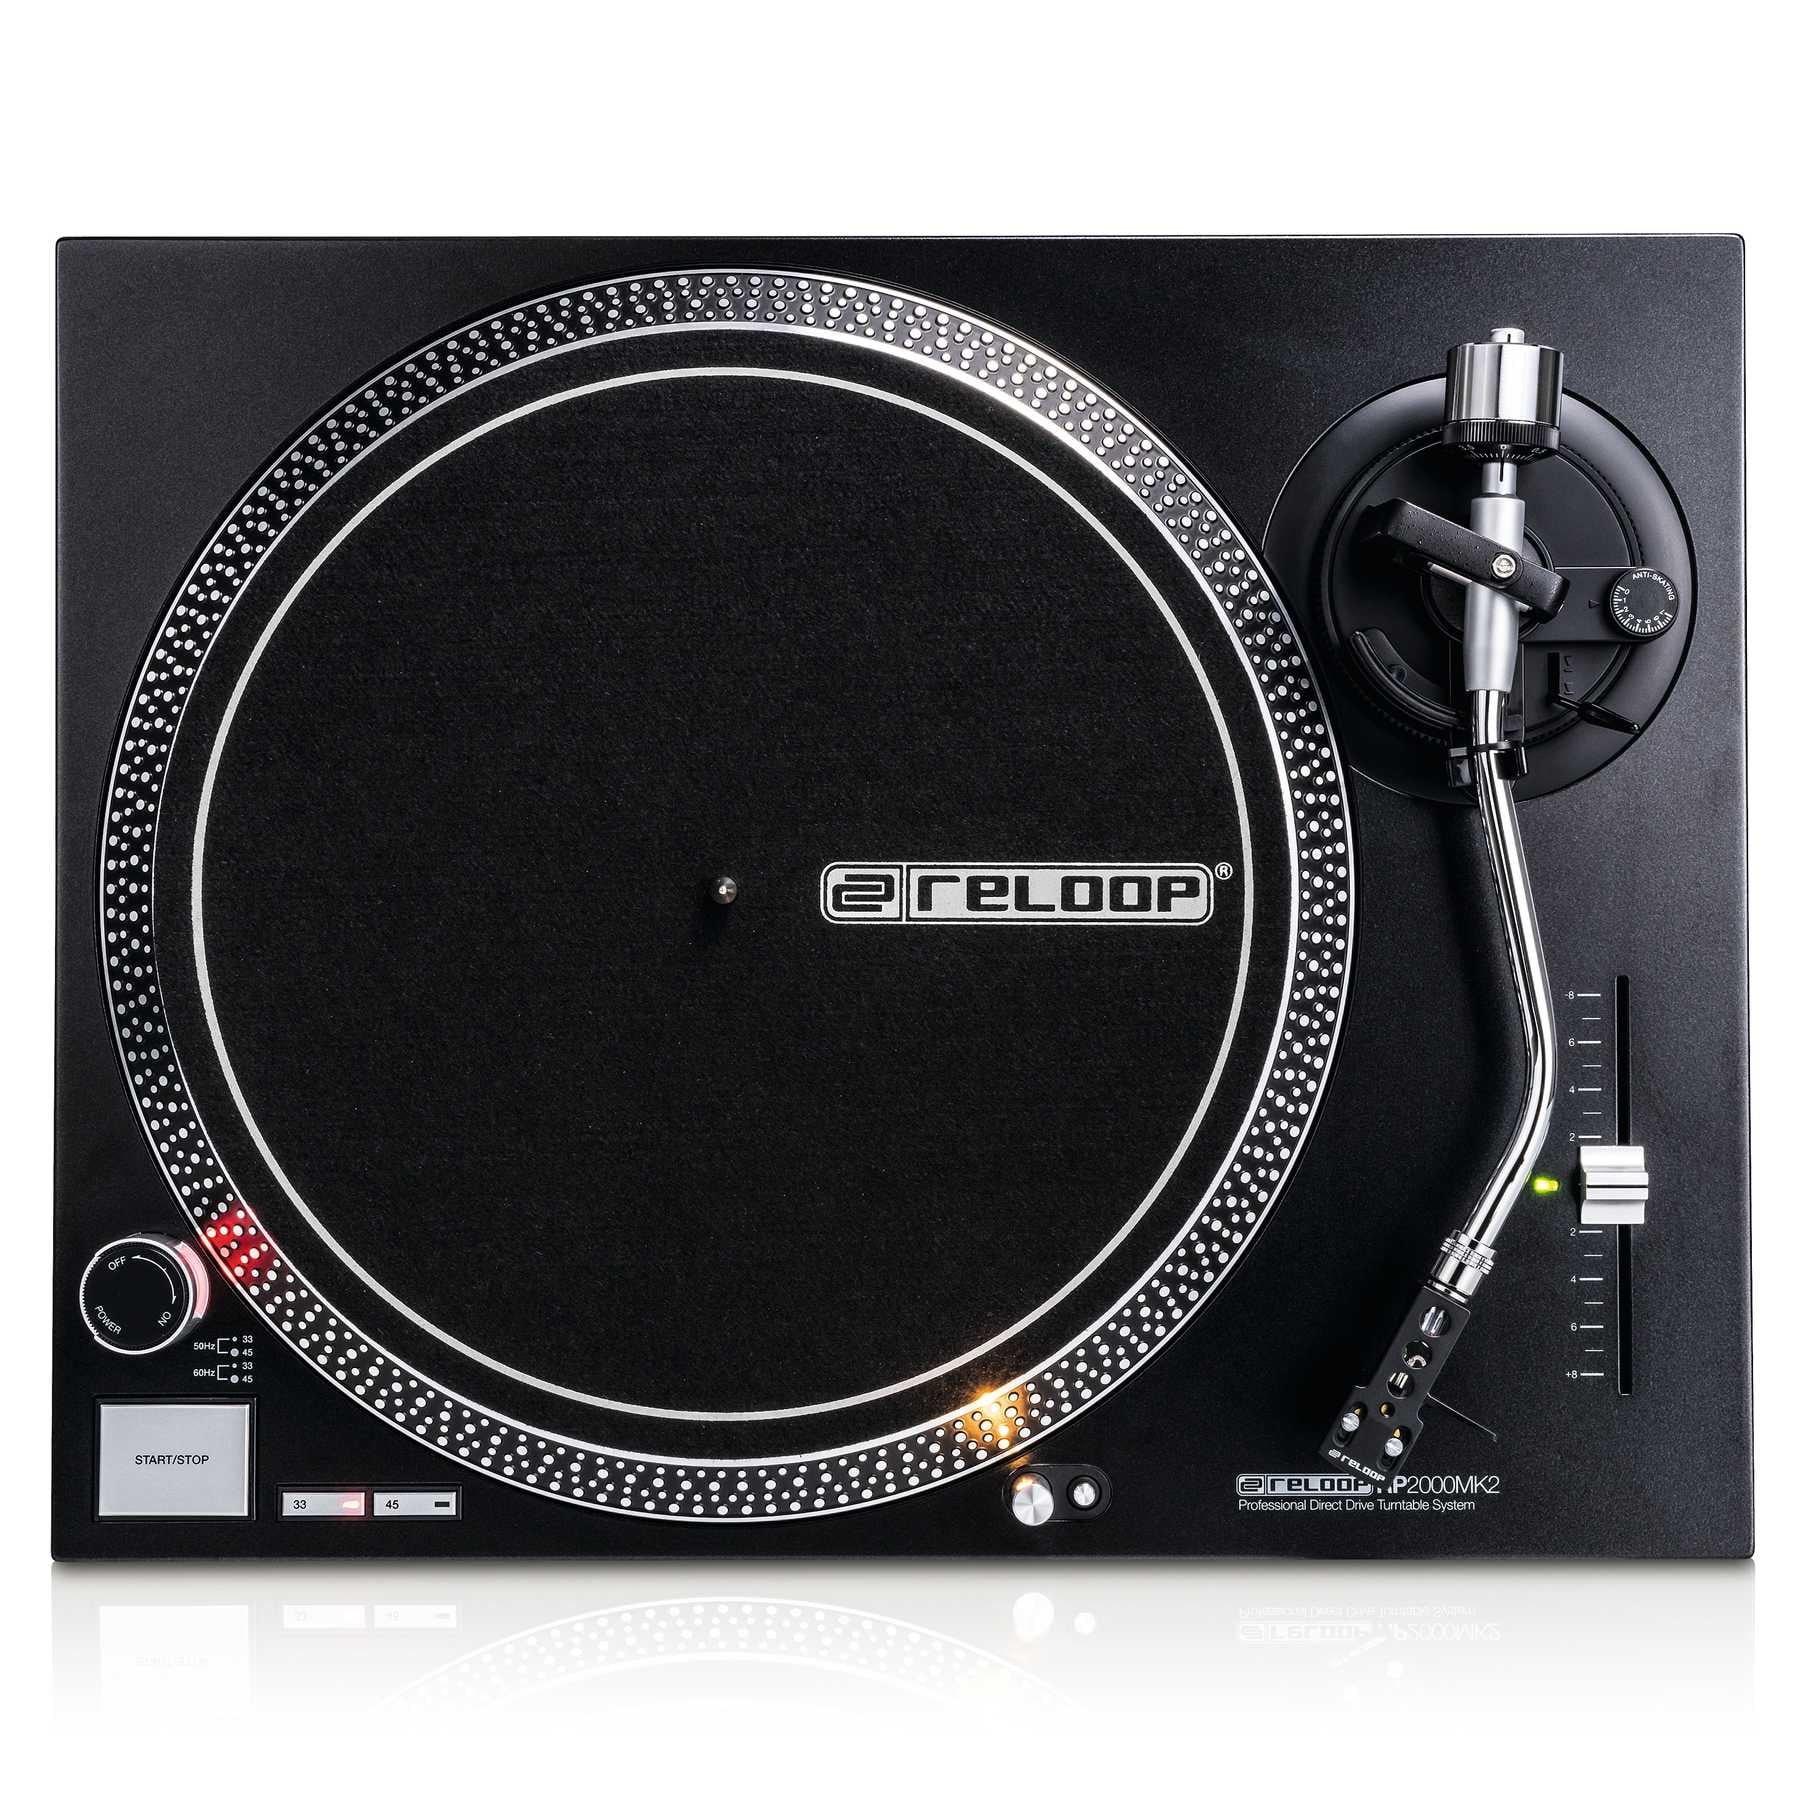 Dual DT 250 USB DJ Turntable Record Player 33/45 rpm Pitch Control Magnetic Pup 